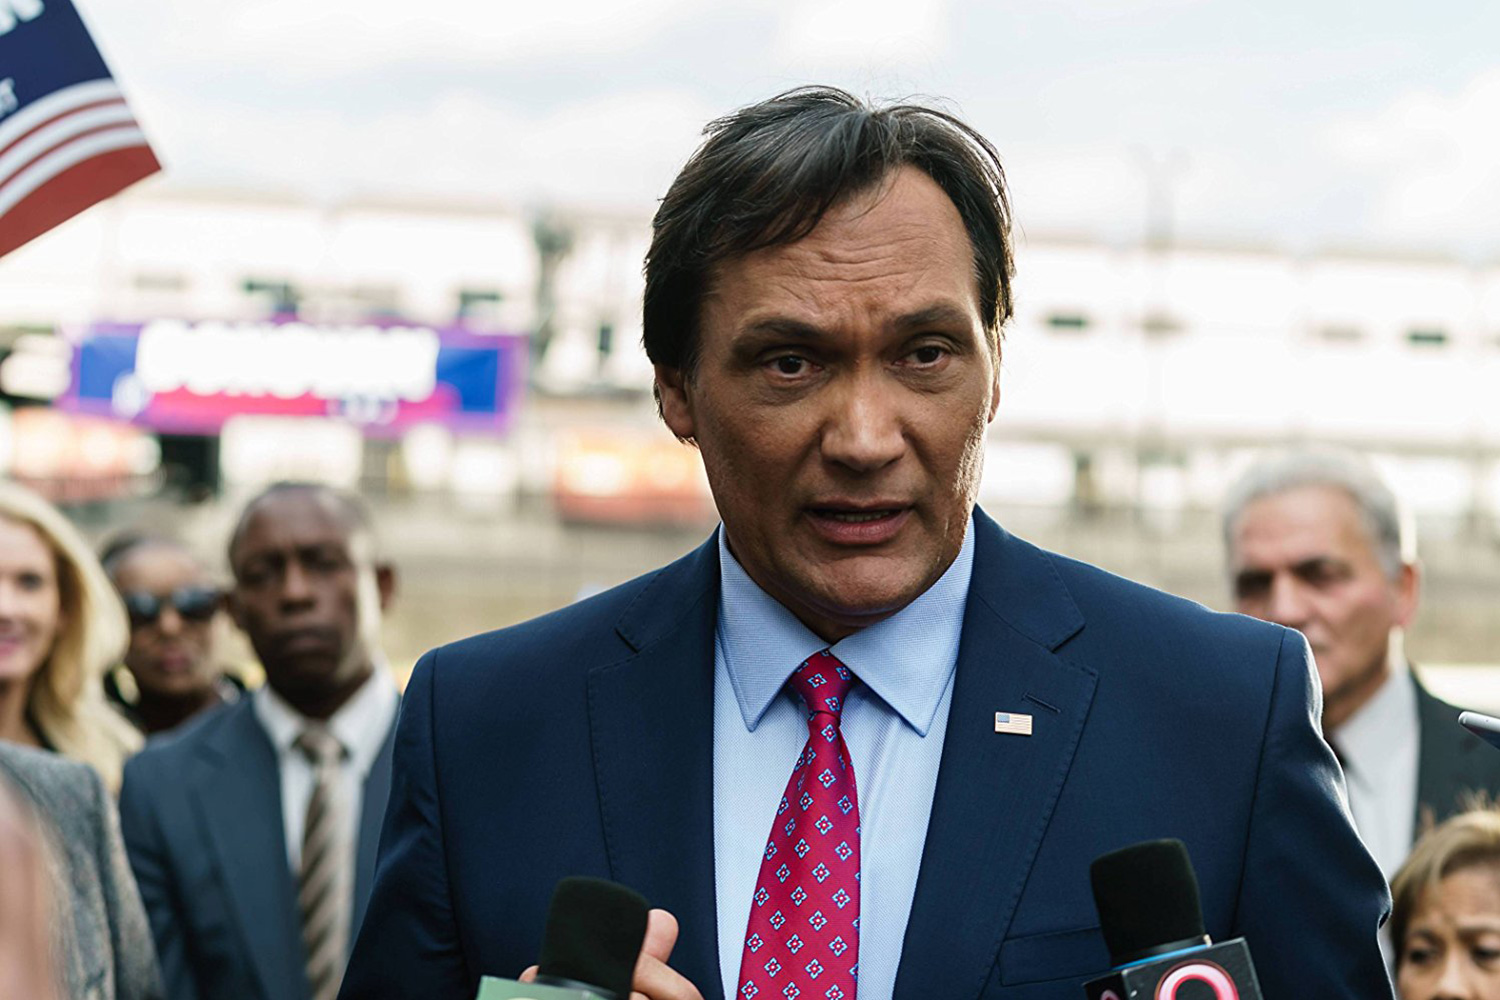 joining the cast Jimmy Smits